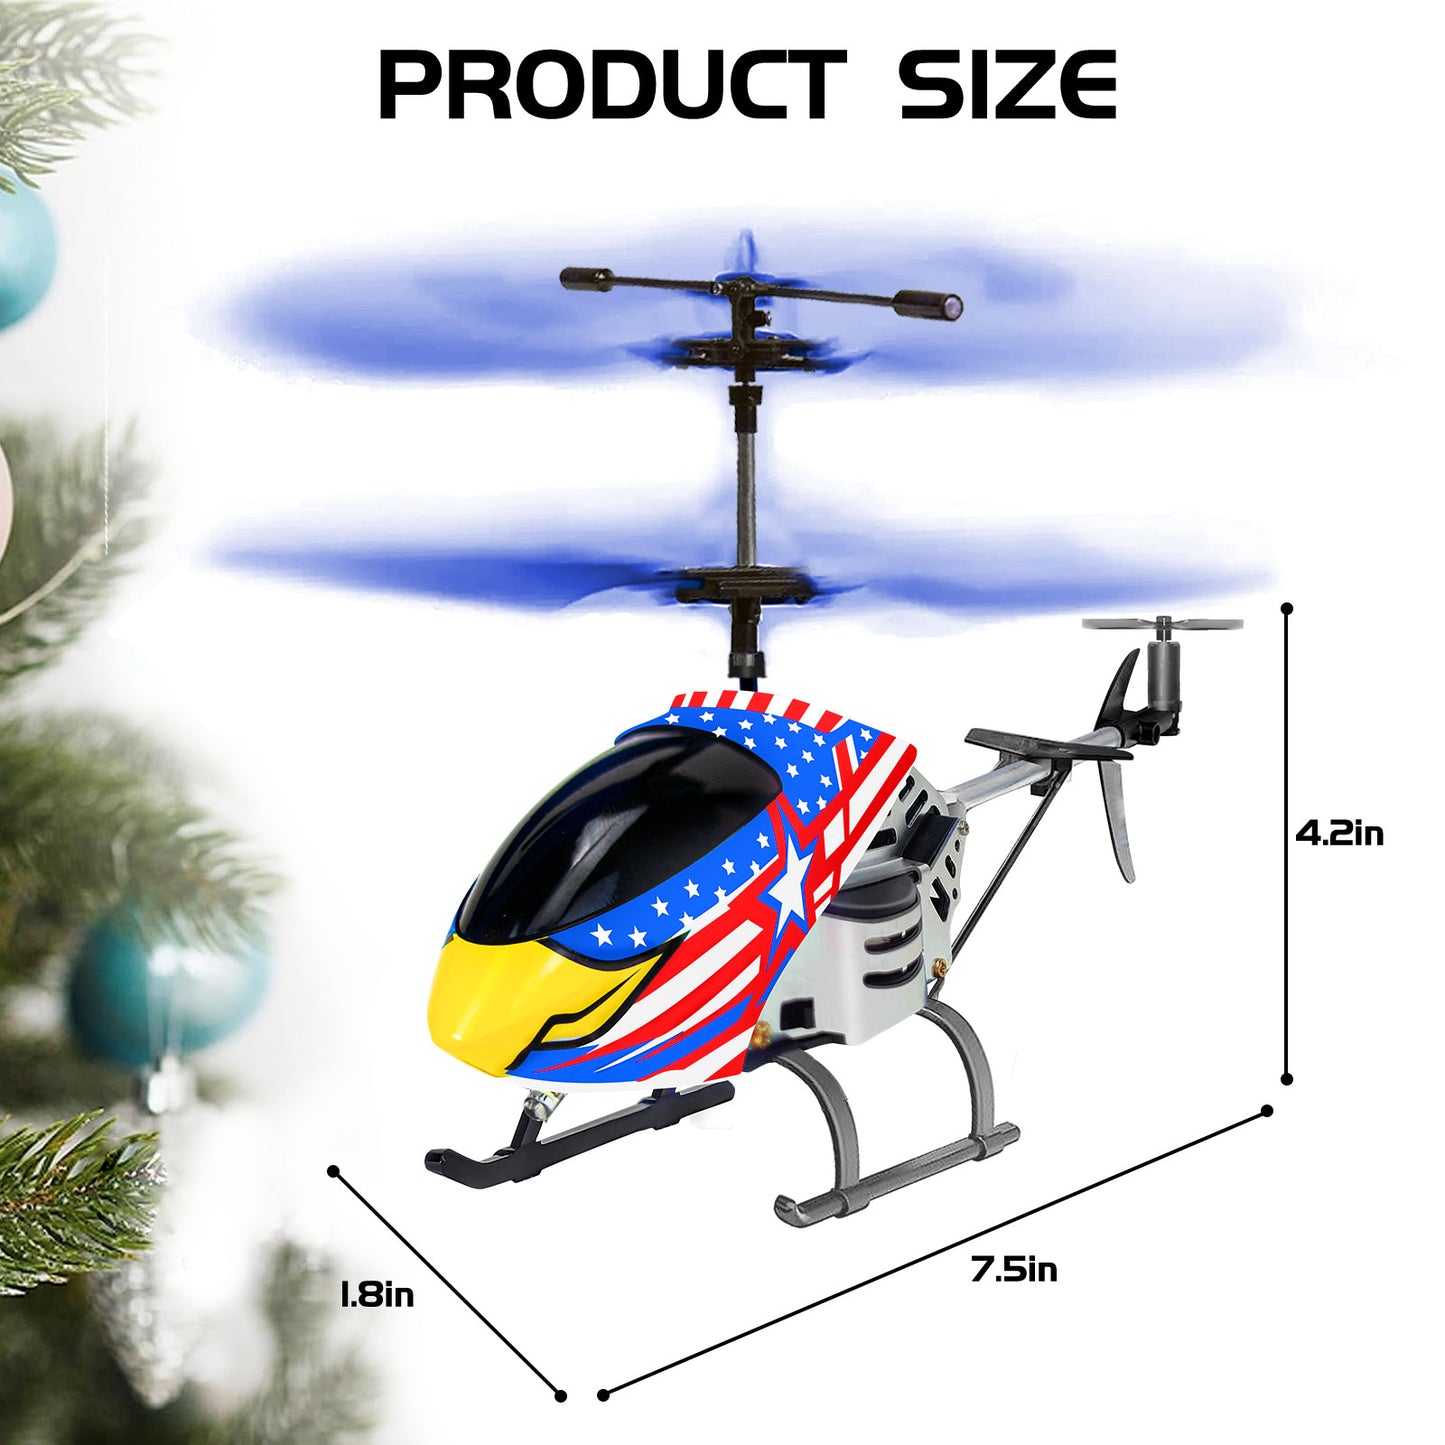 "YongnKids Remote Control Helicopter for Kids| Rc Helicopter Toys w/t LED Lights, 3.5 Channel, Gyro Stabilizer, Altitude Hold, 2.4GHz Helicopter Toys for Beginner Boys Girls Indoor- Eagle "